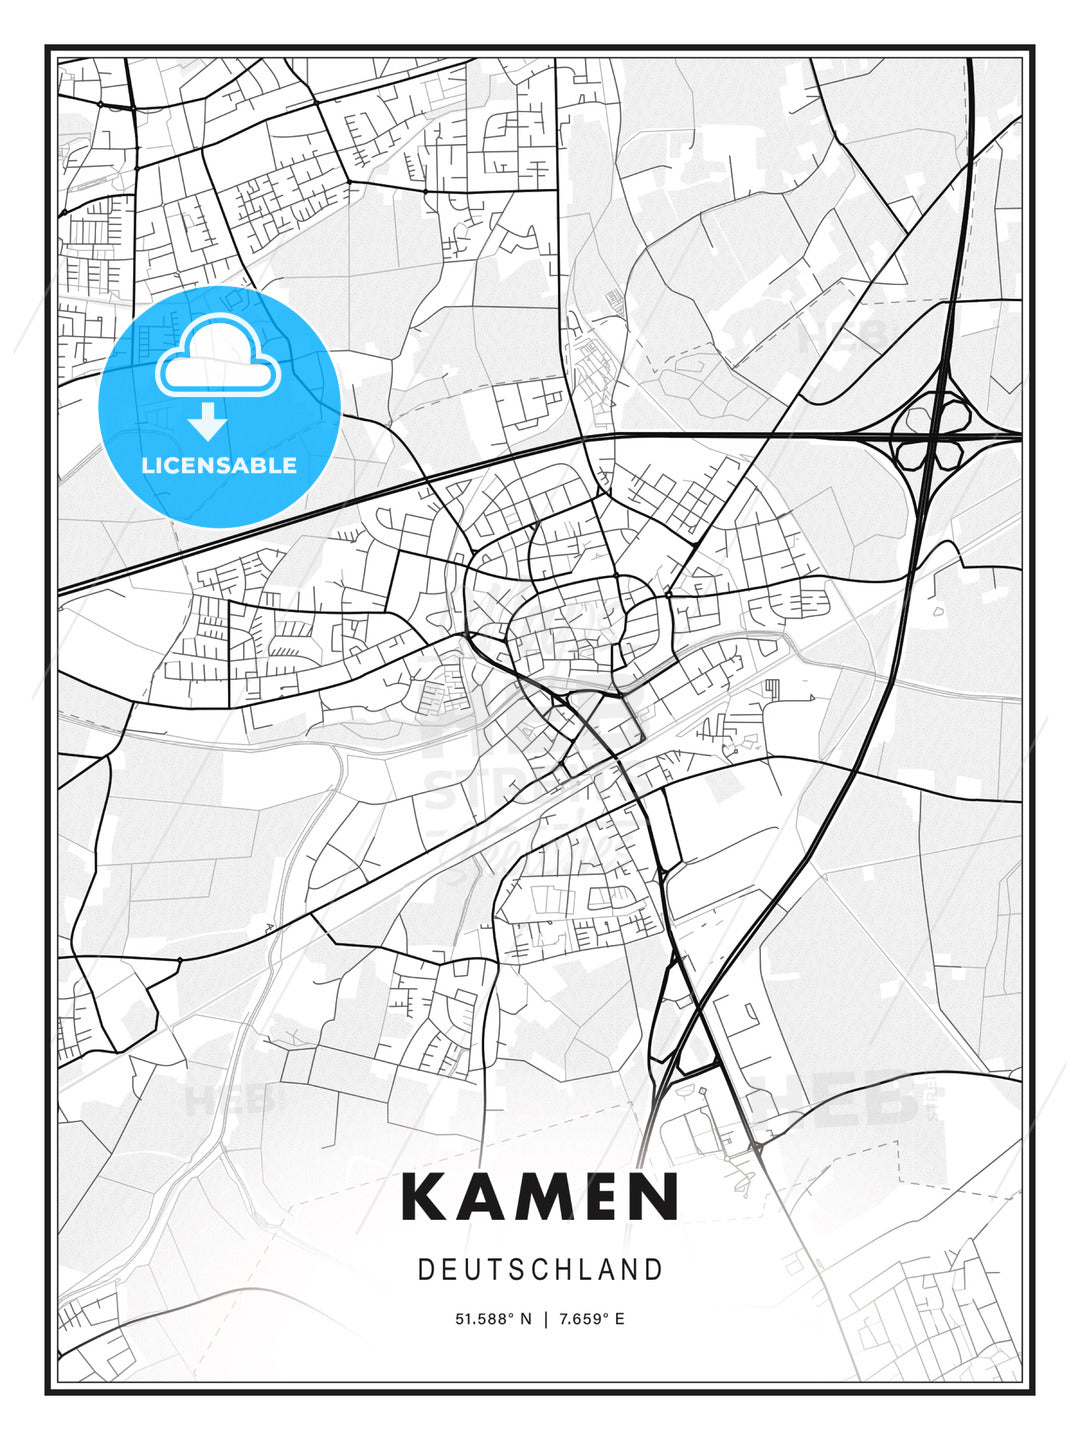 Kamen, Germany, Modern Print Template in Various Formats - HEBSTREITS Sketches